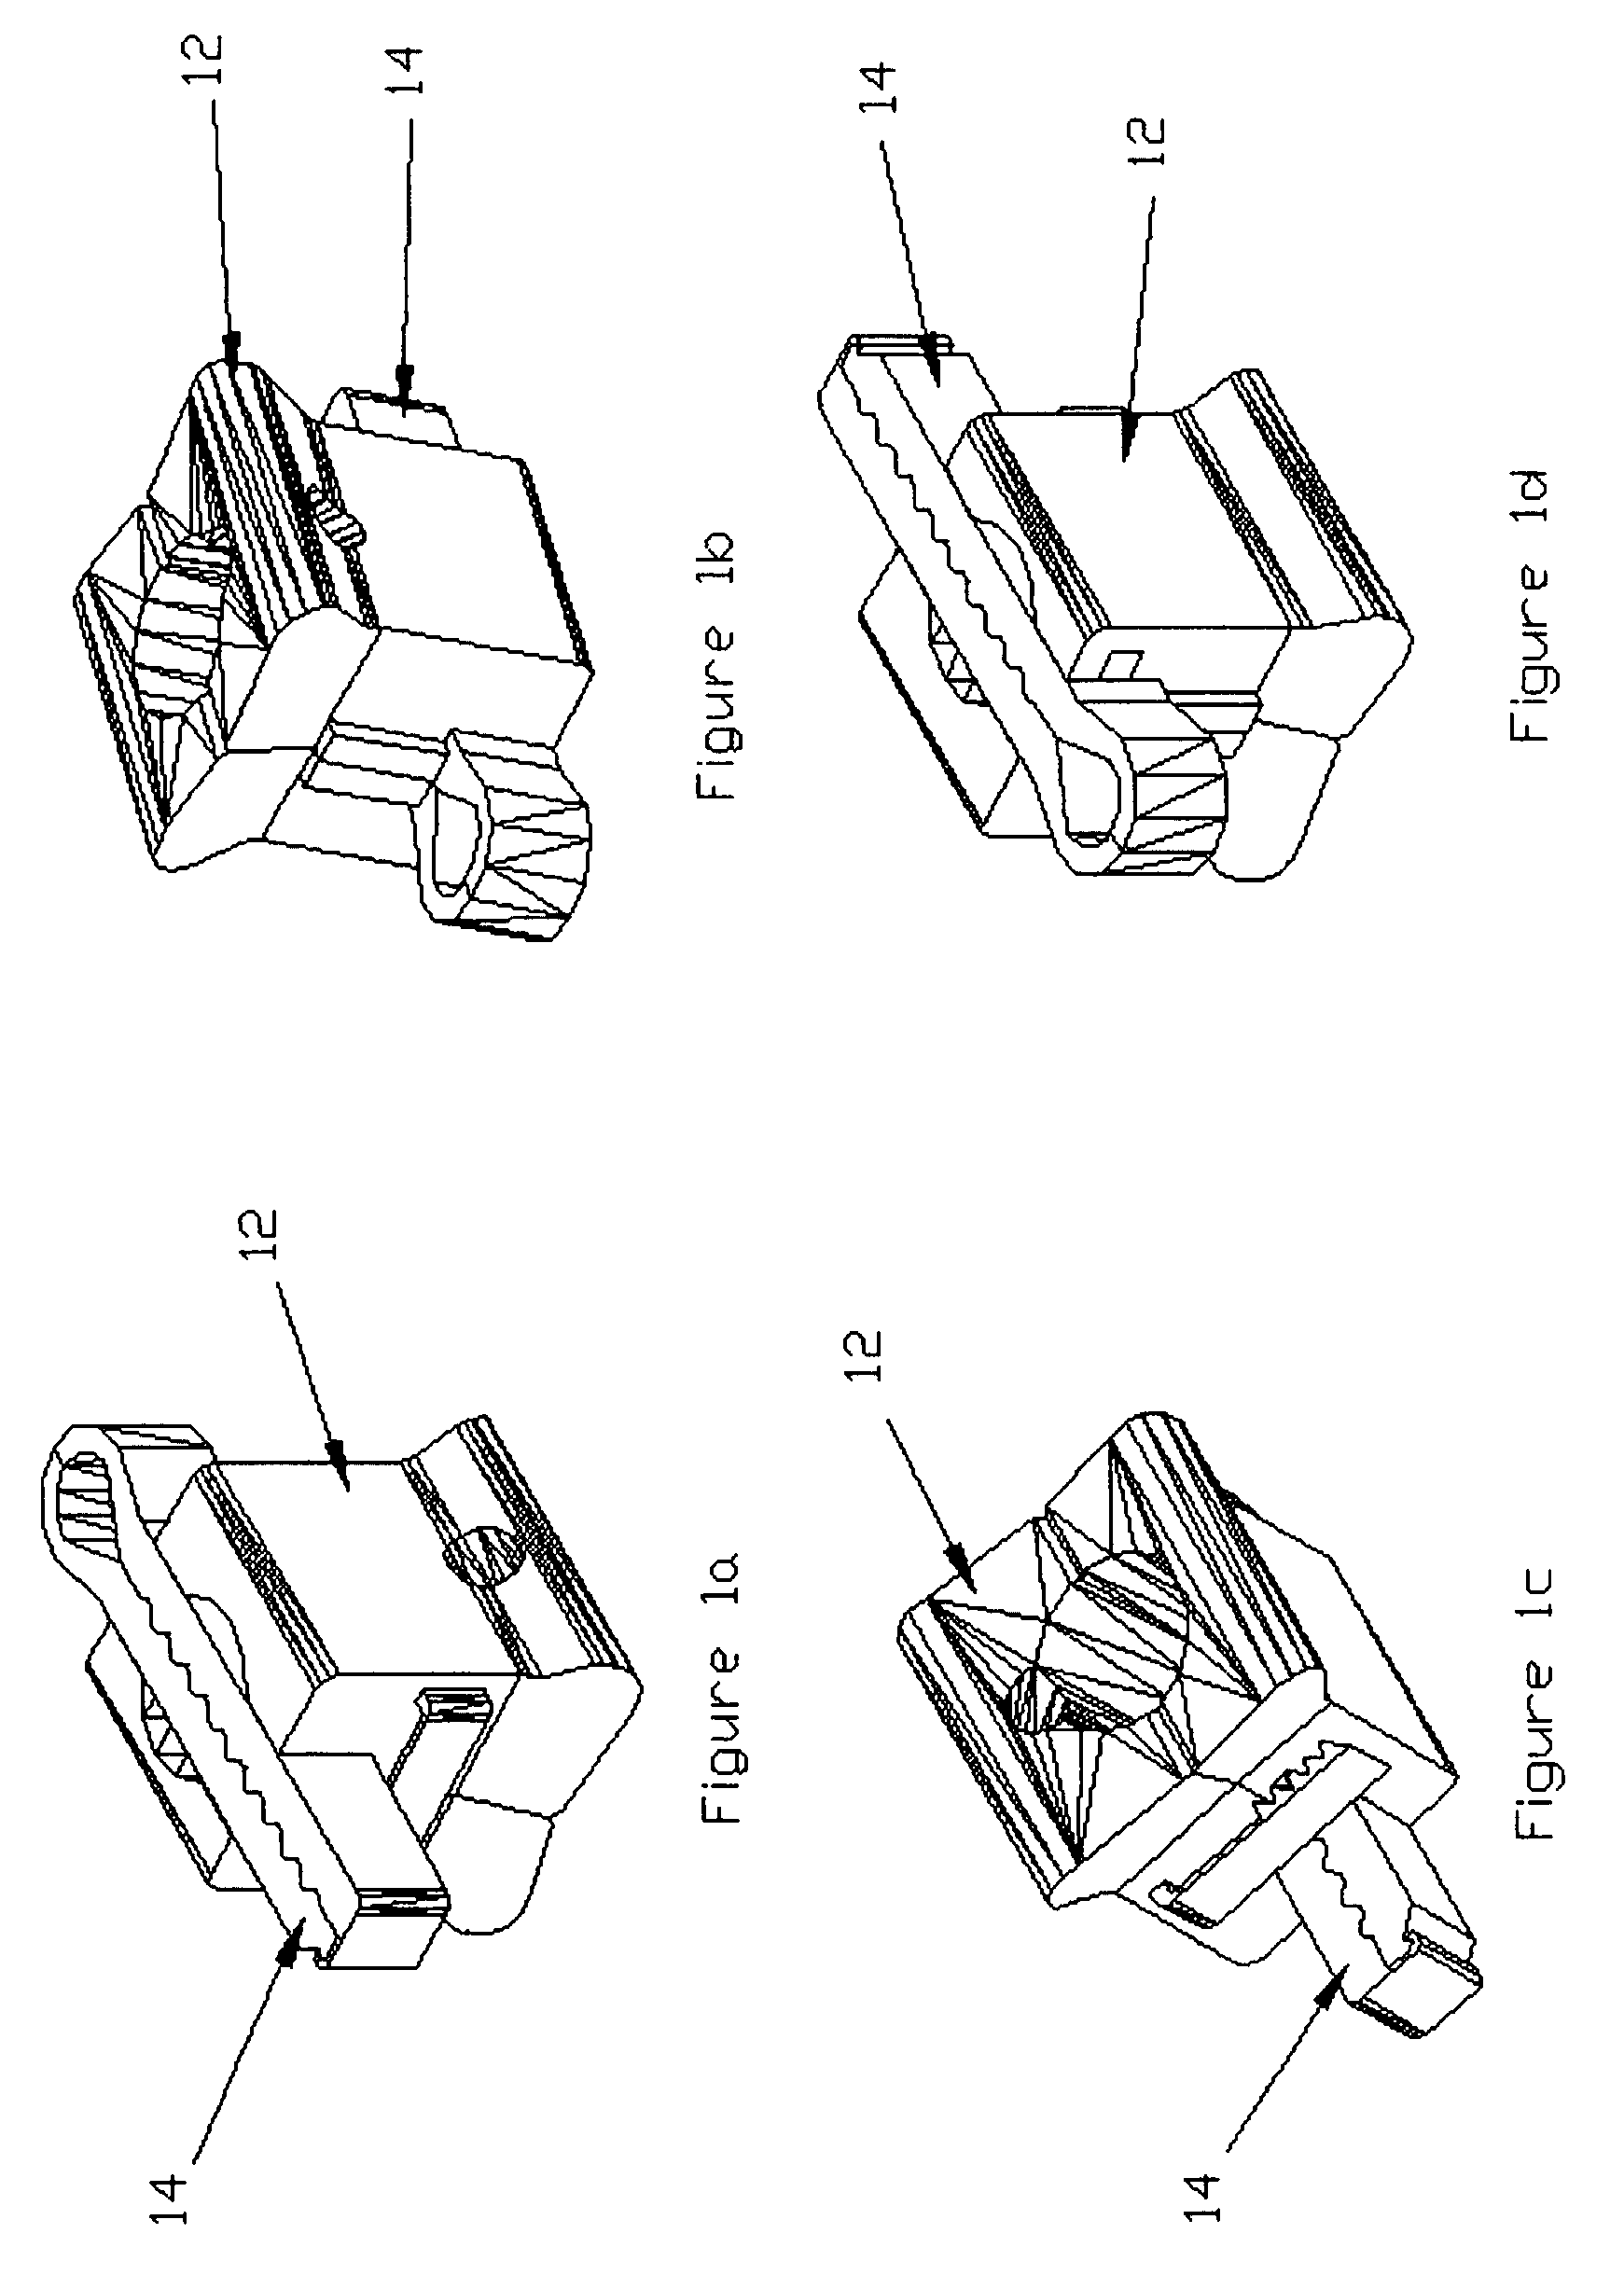 Infant umbilical cord cardiac monitoring system and method